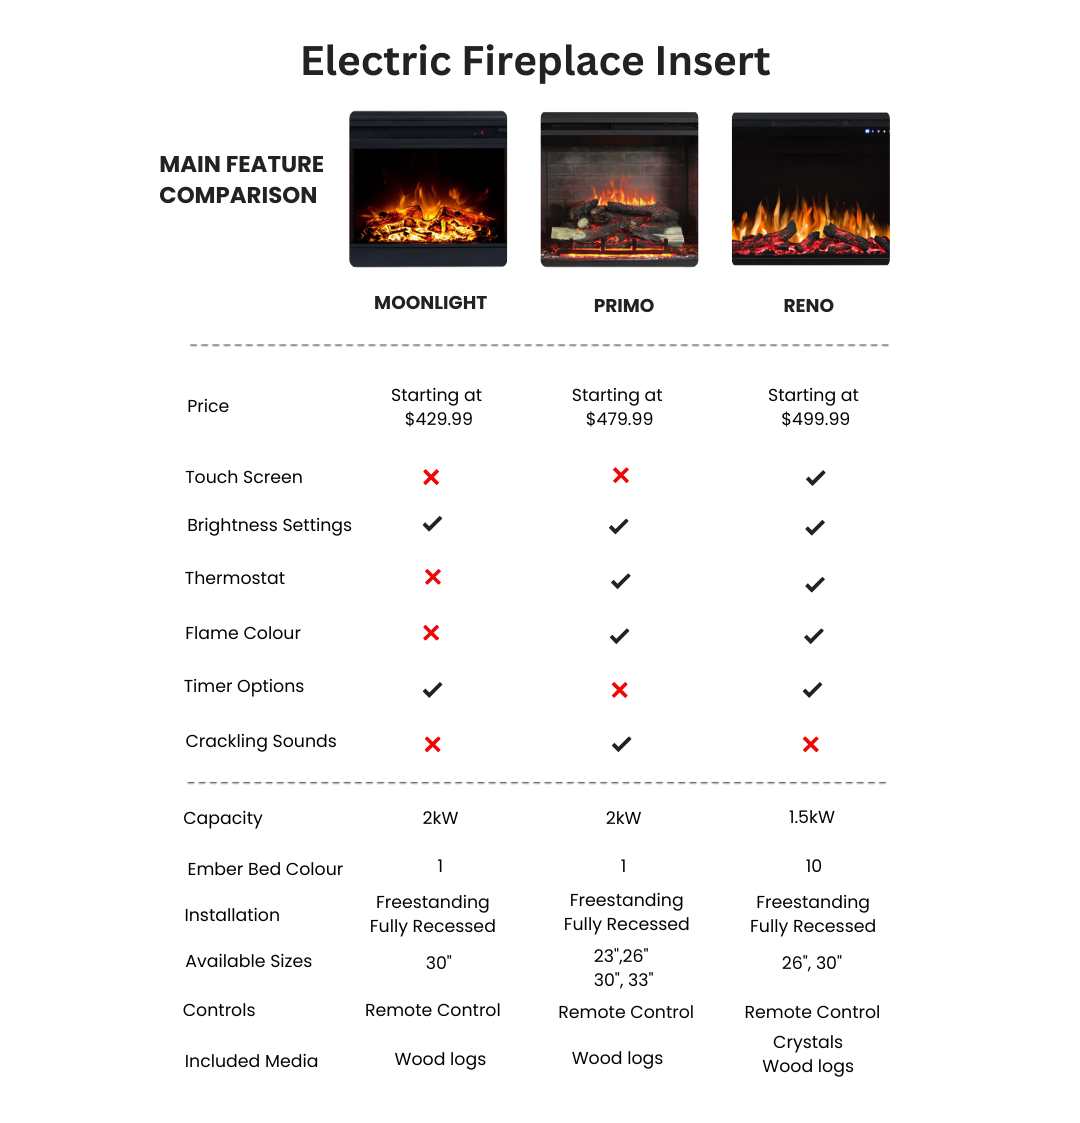 Electric Fireplace Insert Comparison Guide